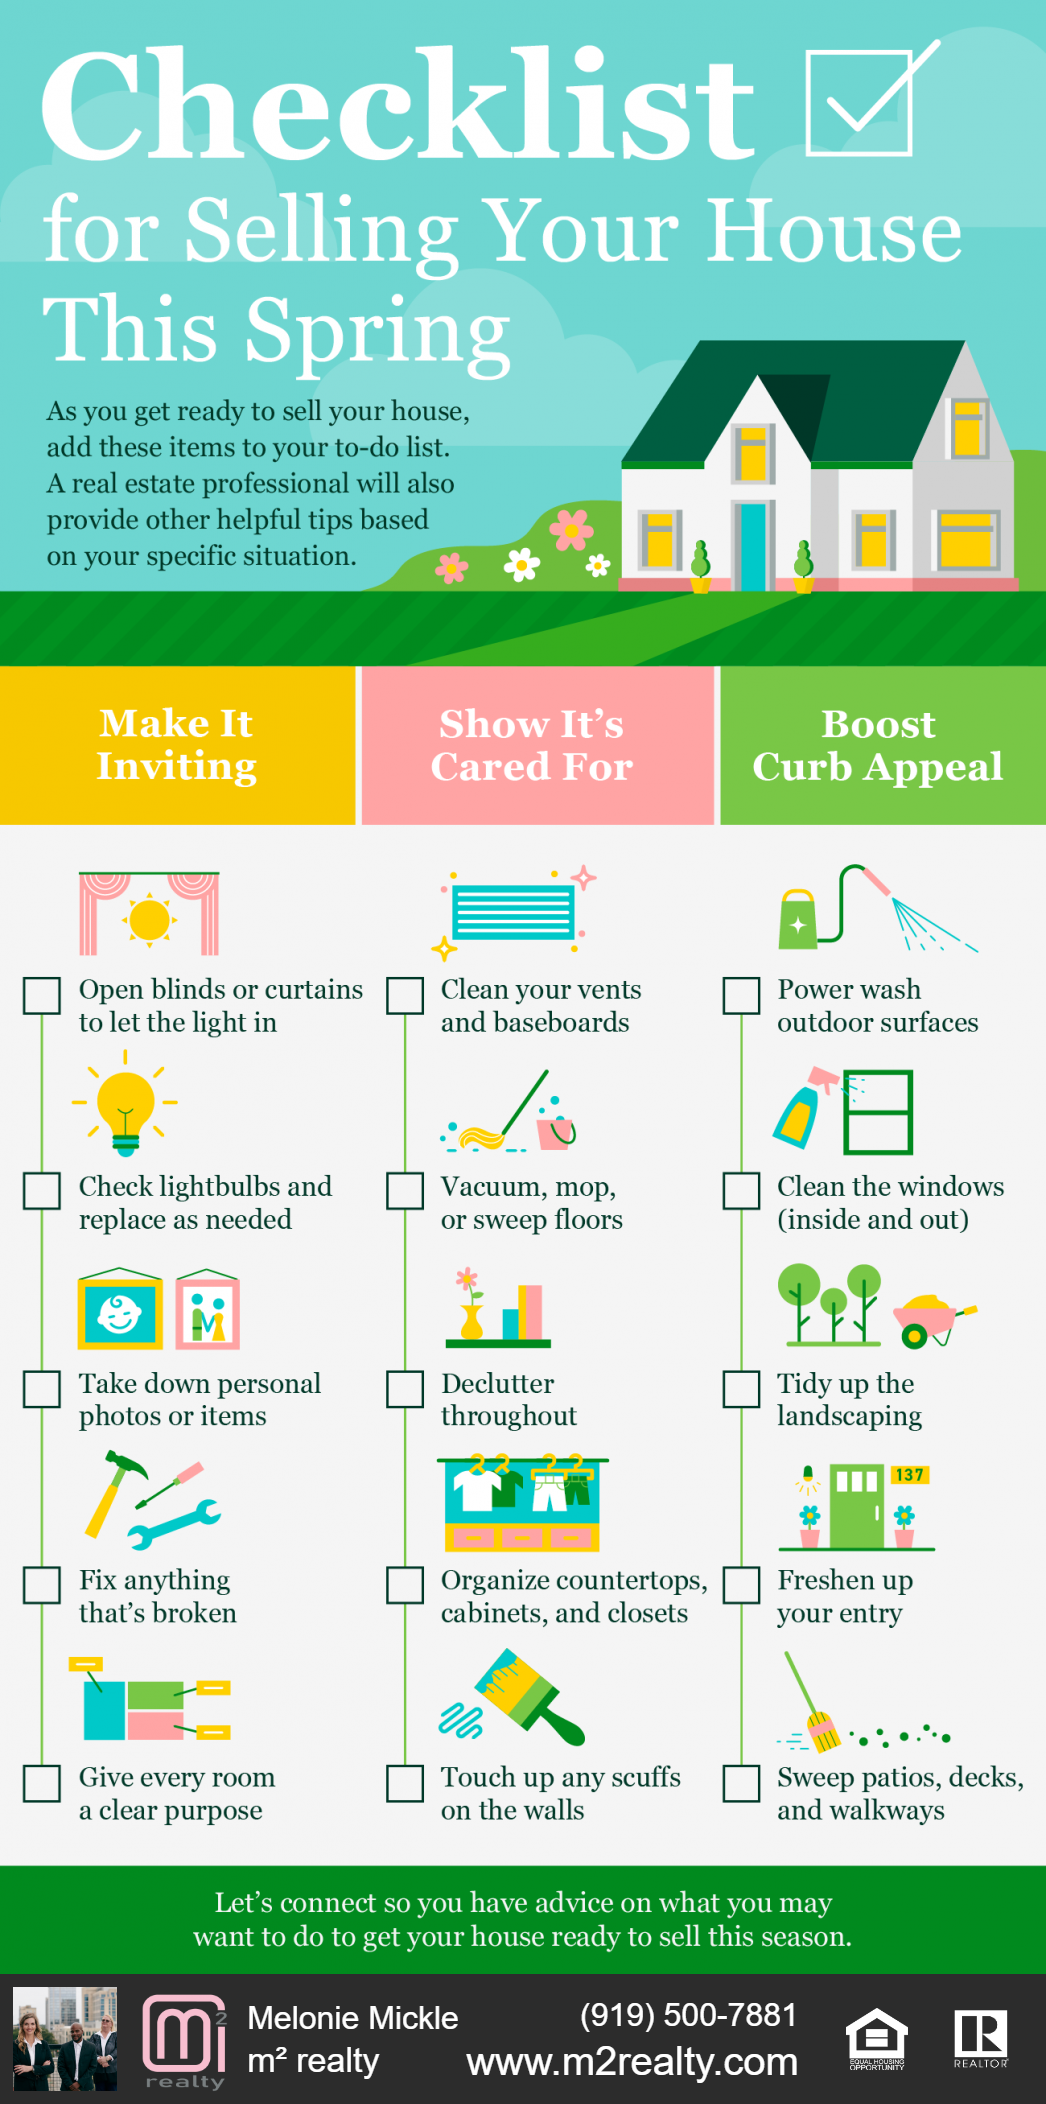 m2 realty shares checklist for selling your house this spring.